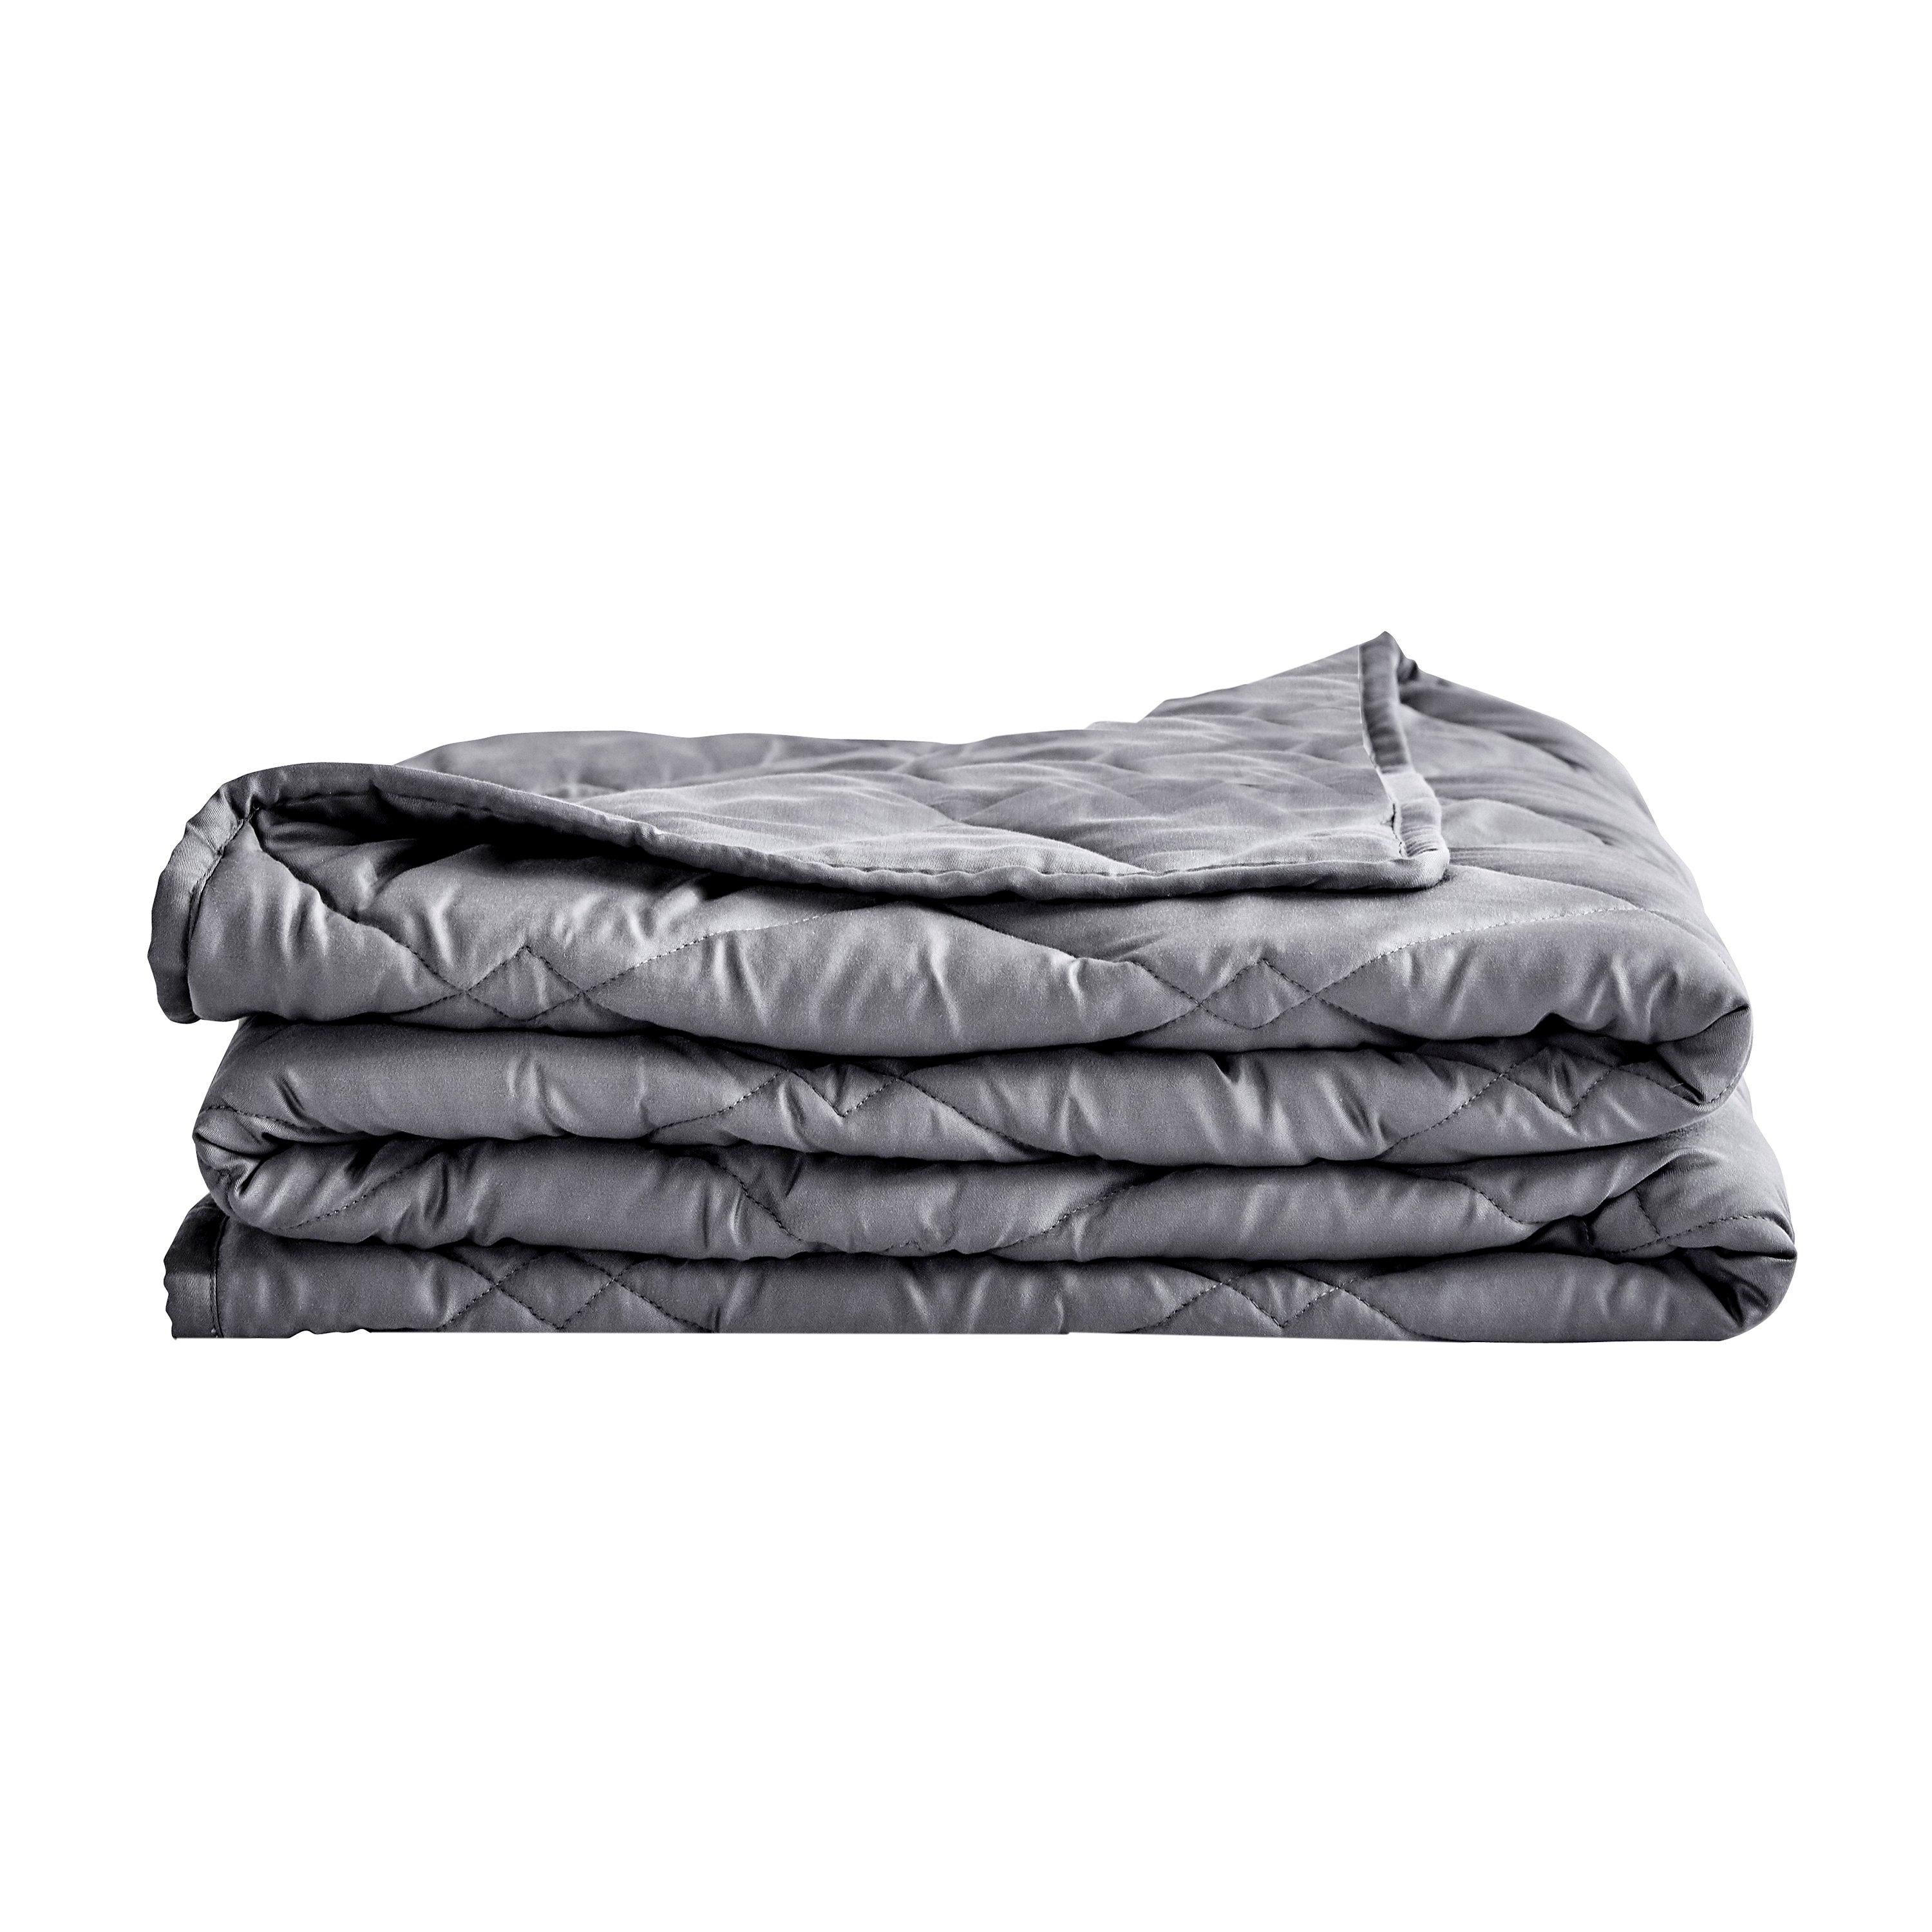 Eco-Friendly Tencel 10 lb Weighted Throw Blanket